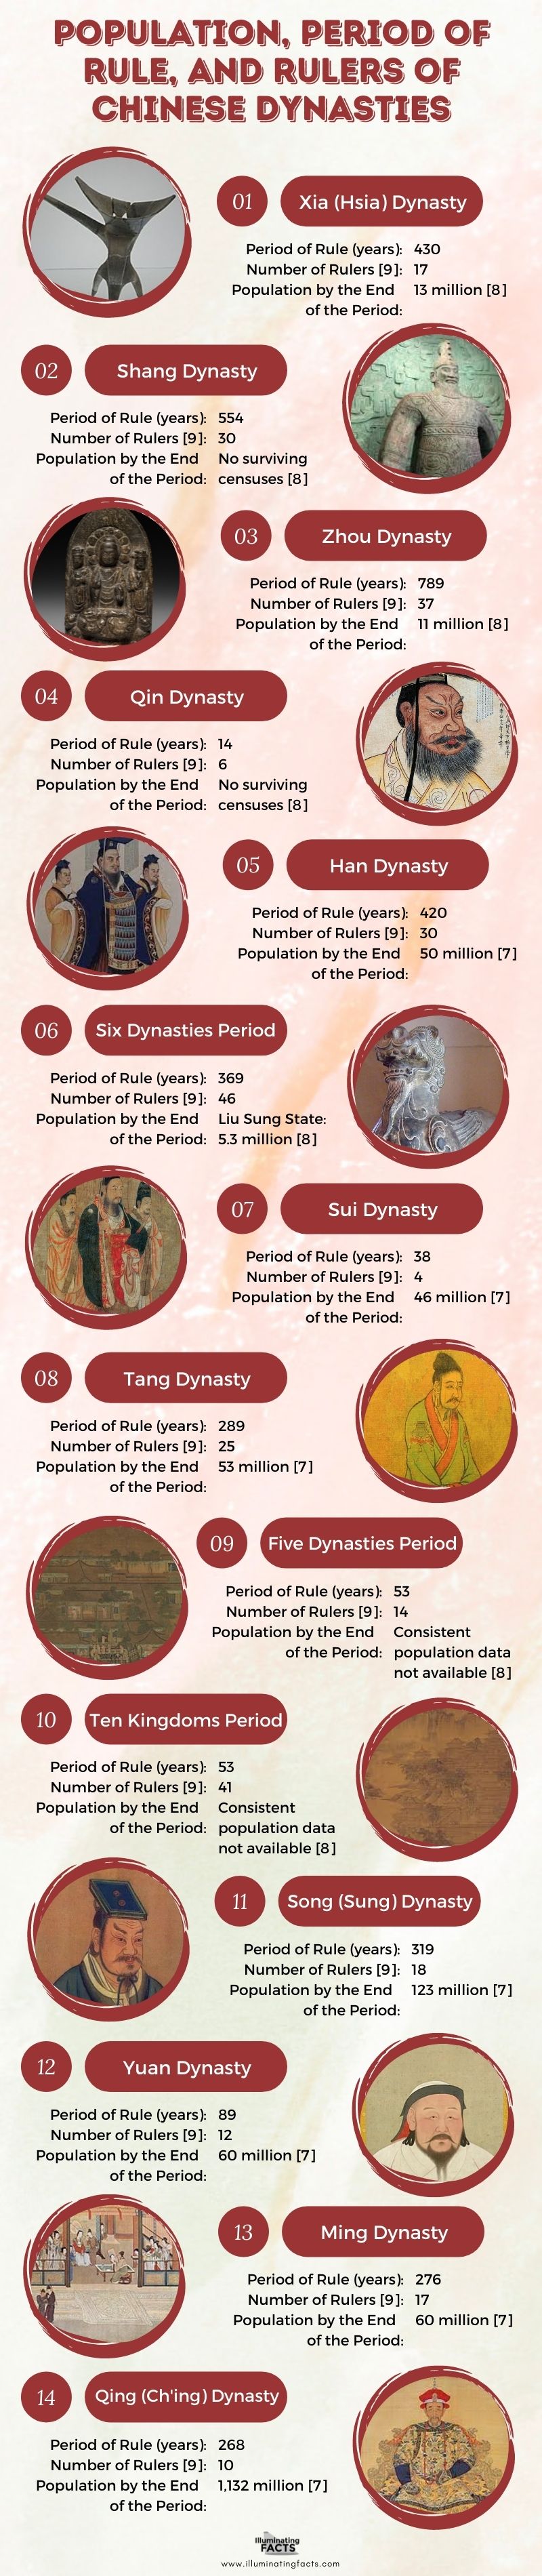 Population, Period of Rule, and Rulers of Chinese Dynasties